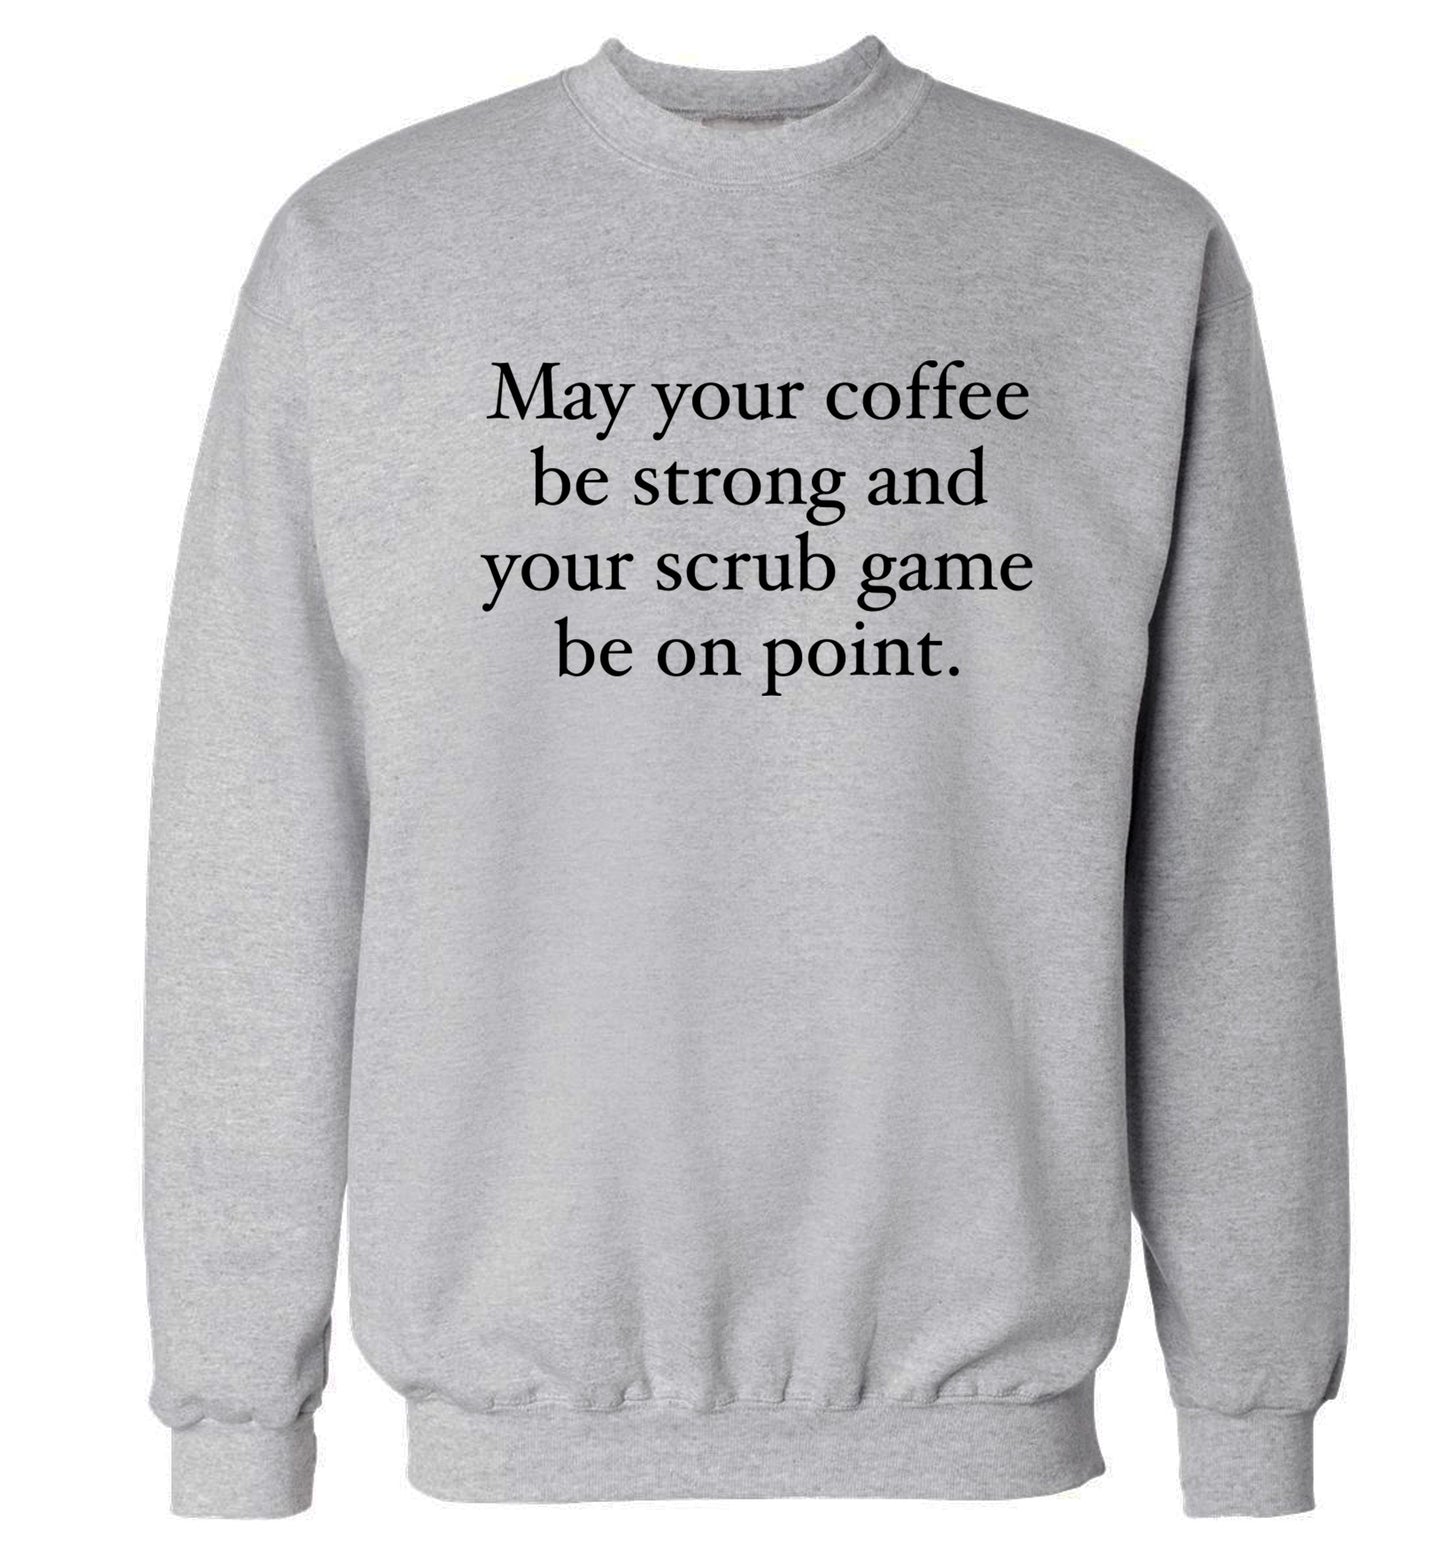 May your caffeine be strong and your scrub game be on point Adult's unisex grey Sweater 2XL